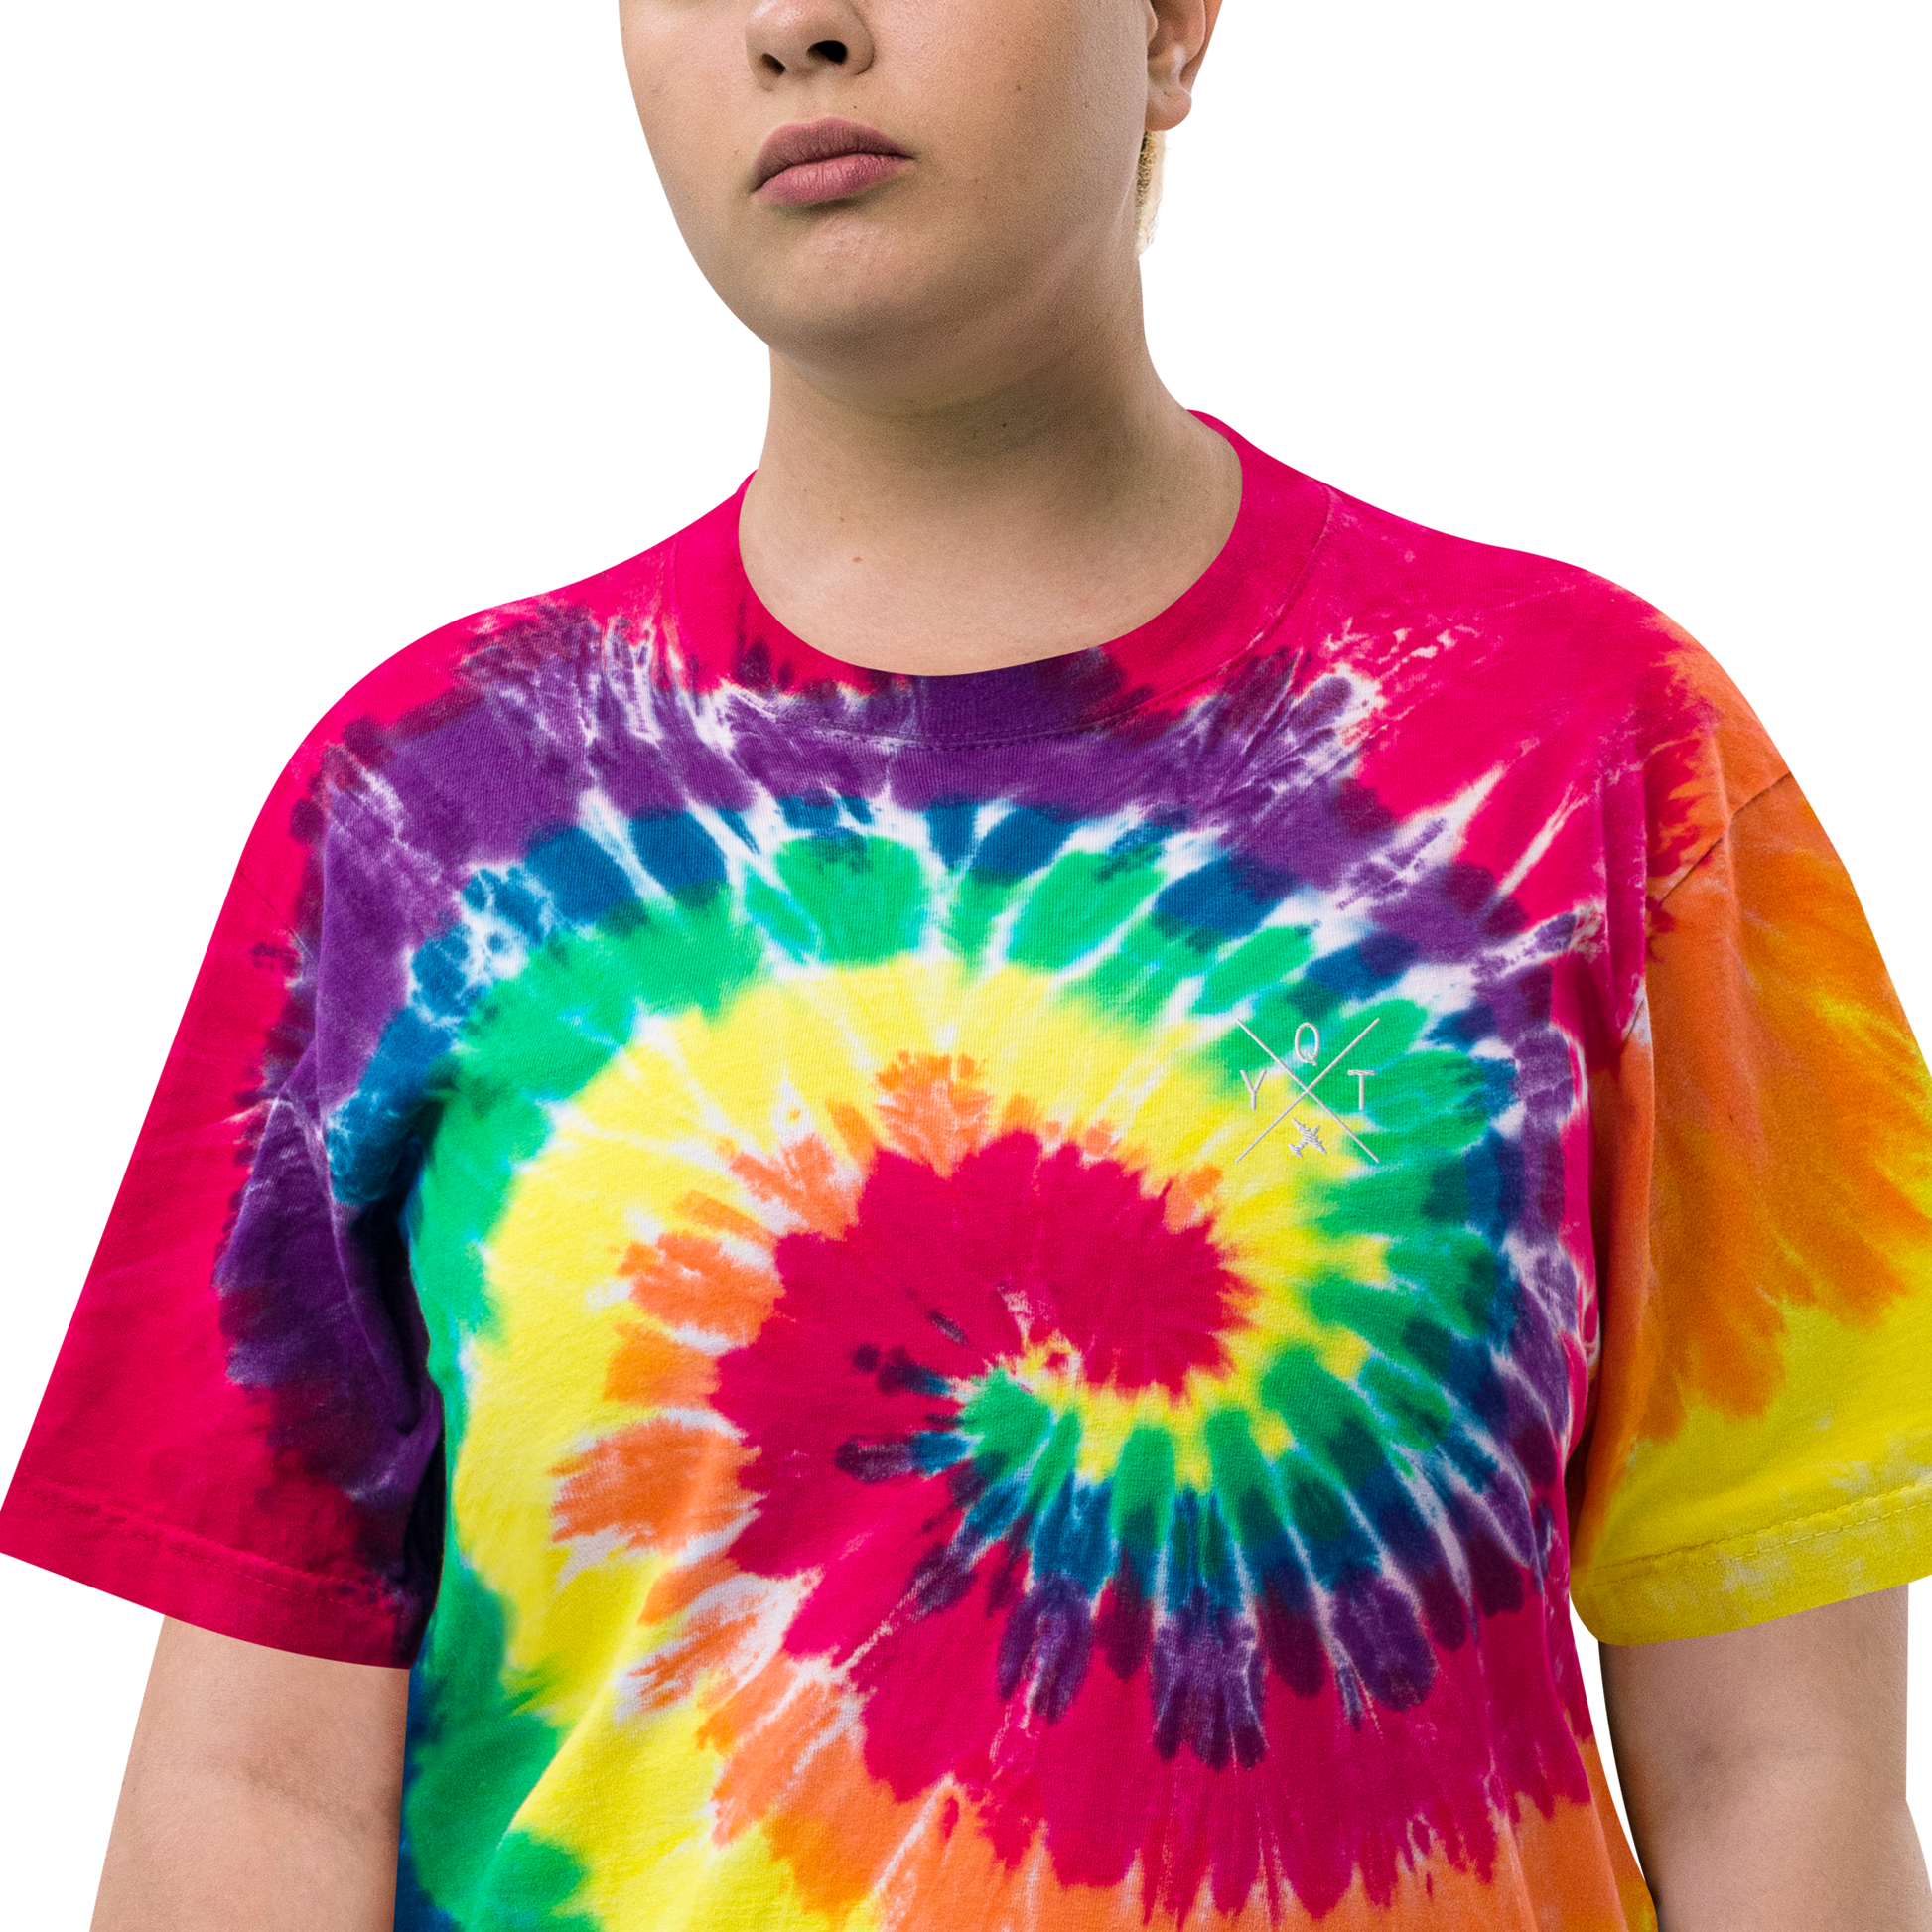 YHM Designs - YQT Thunder Bay Oversized Tie-Dye T-Shirt - Crossed-X Design with Airport Code and Vintage Propliner - White Embroidery - Image 15